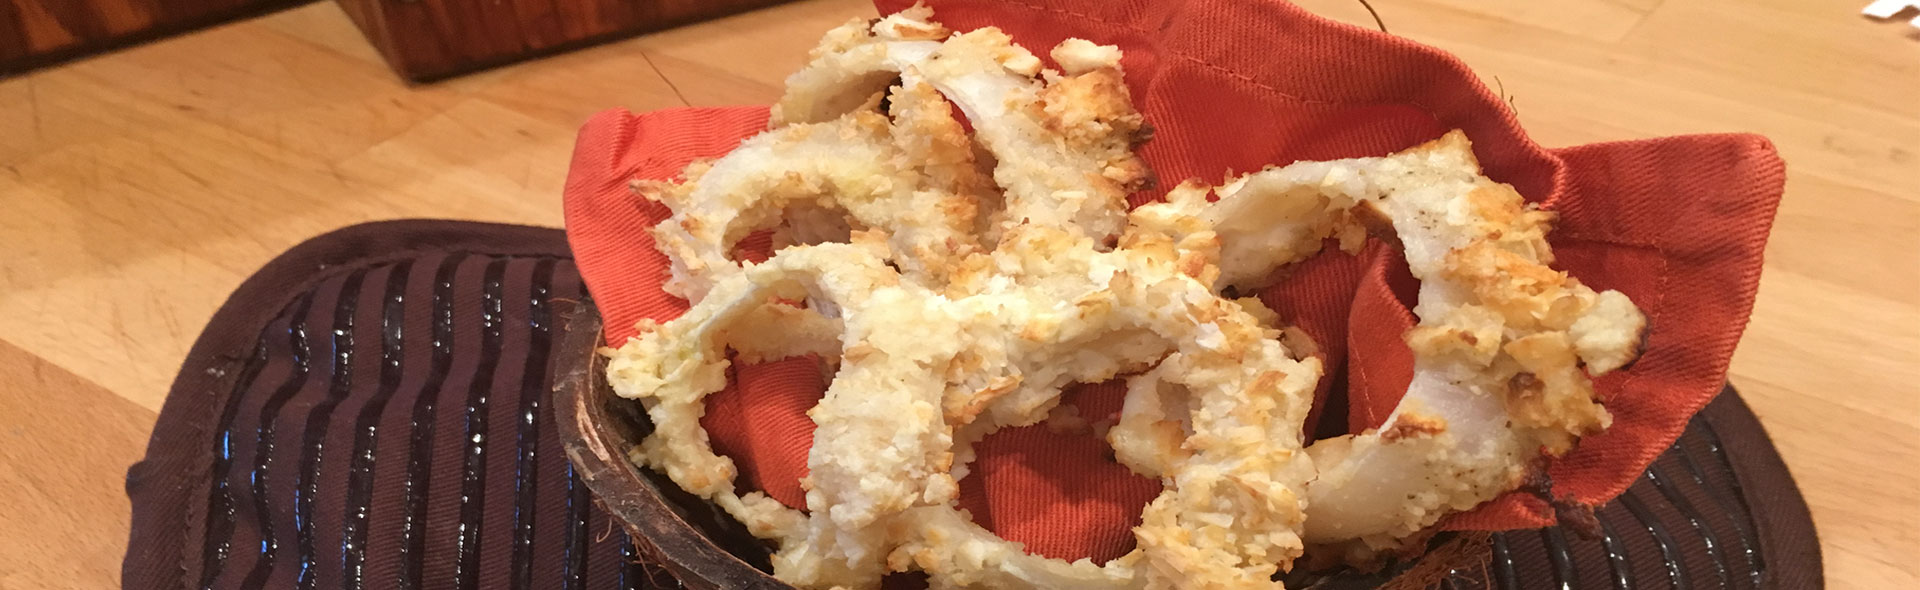 baked not fried, coconut battered onion rings